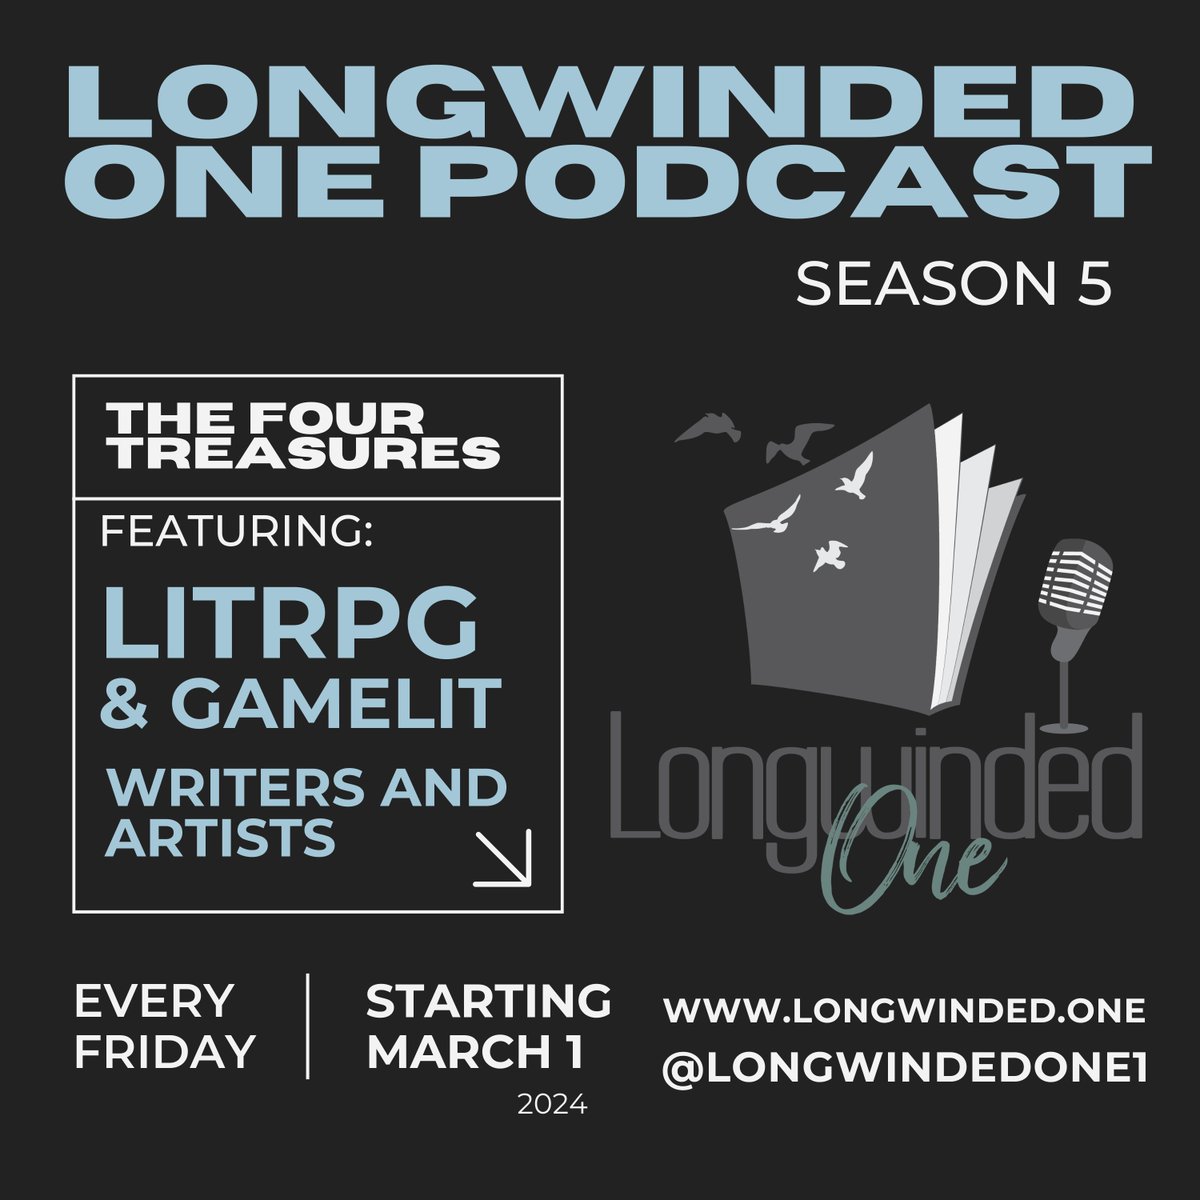 Episode 15 and 16 dropped featuring #royalroad author Adam Atenburgh and talented #voiceartist @benmayactor read Dragonheart Core #litrpg #GameLit #audiobooks #Audible #podcast #ttrpg #VoiceOver longwinded.one/episode-215-in… longwinded.one/episode-216-dr…